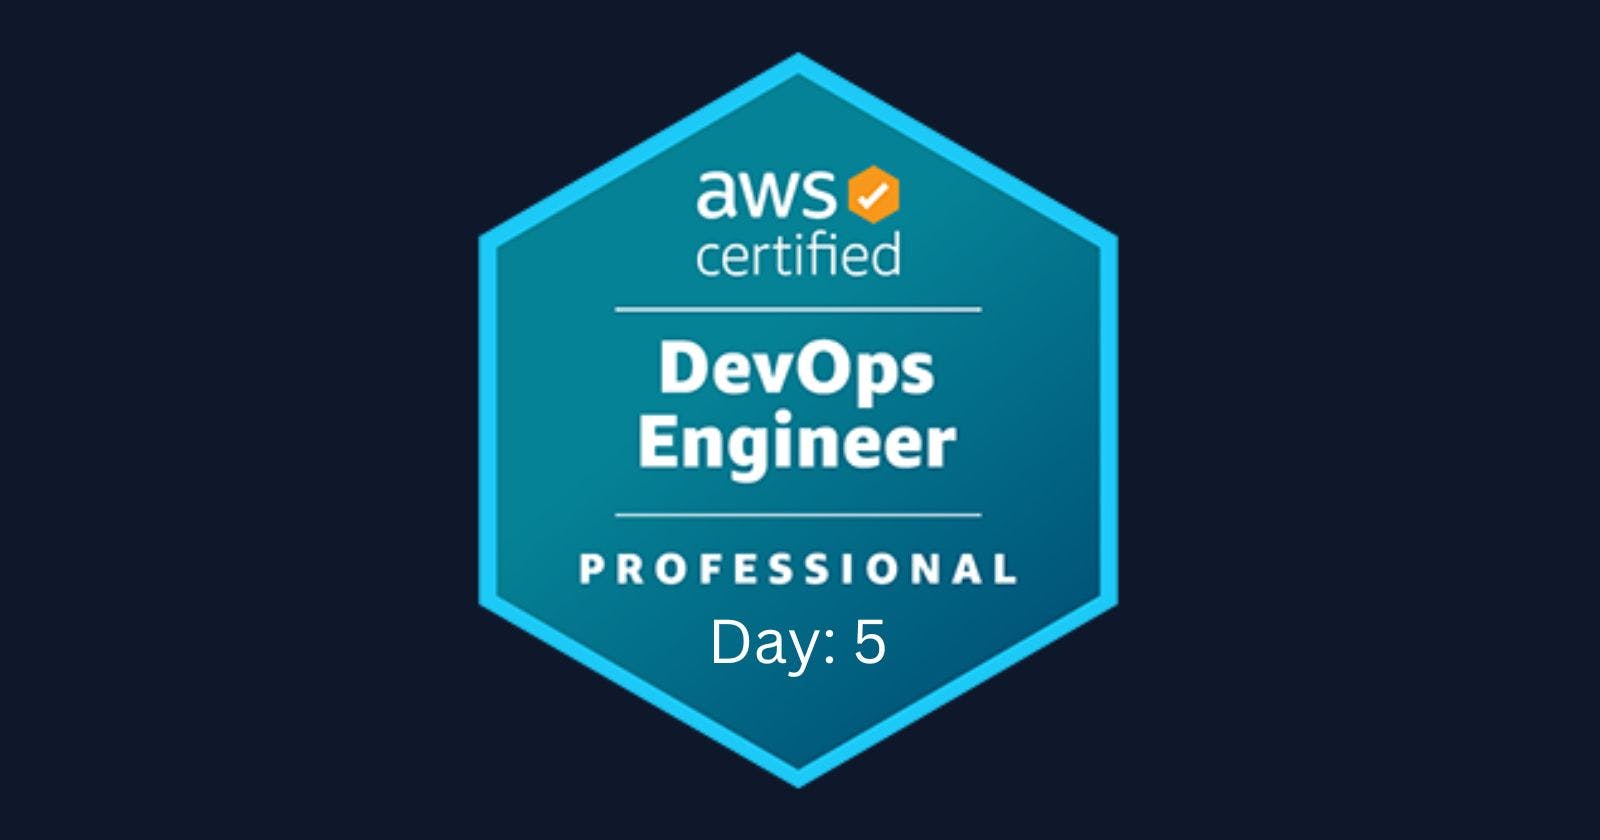 🚀 Exciting Day 5 of My AWS DevOps Engineer Professional Journey! 🚀